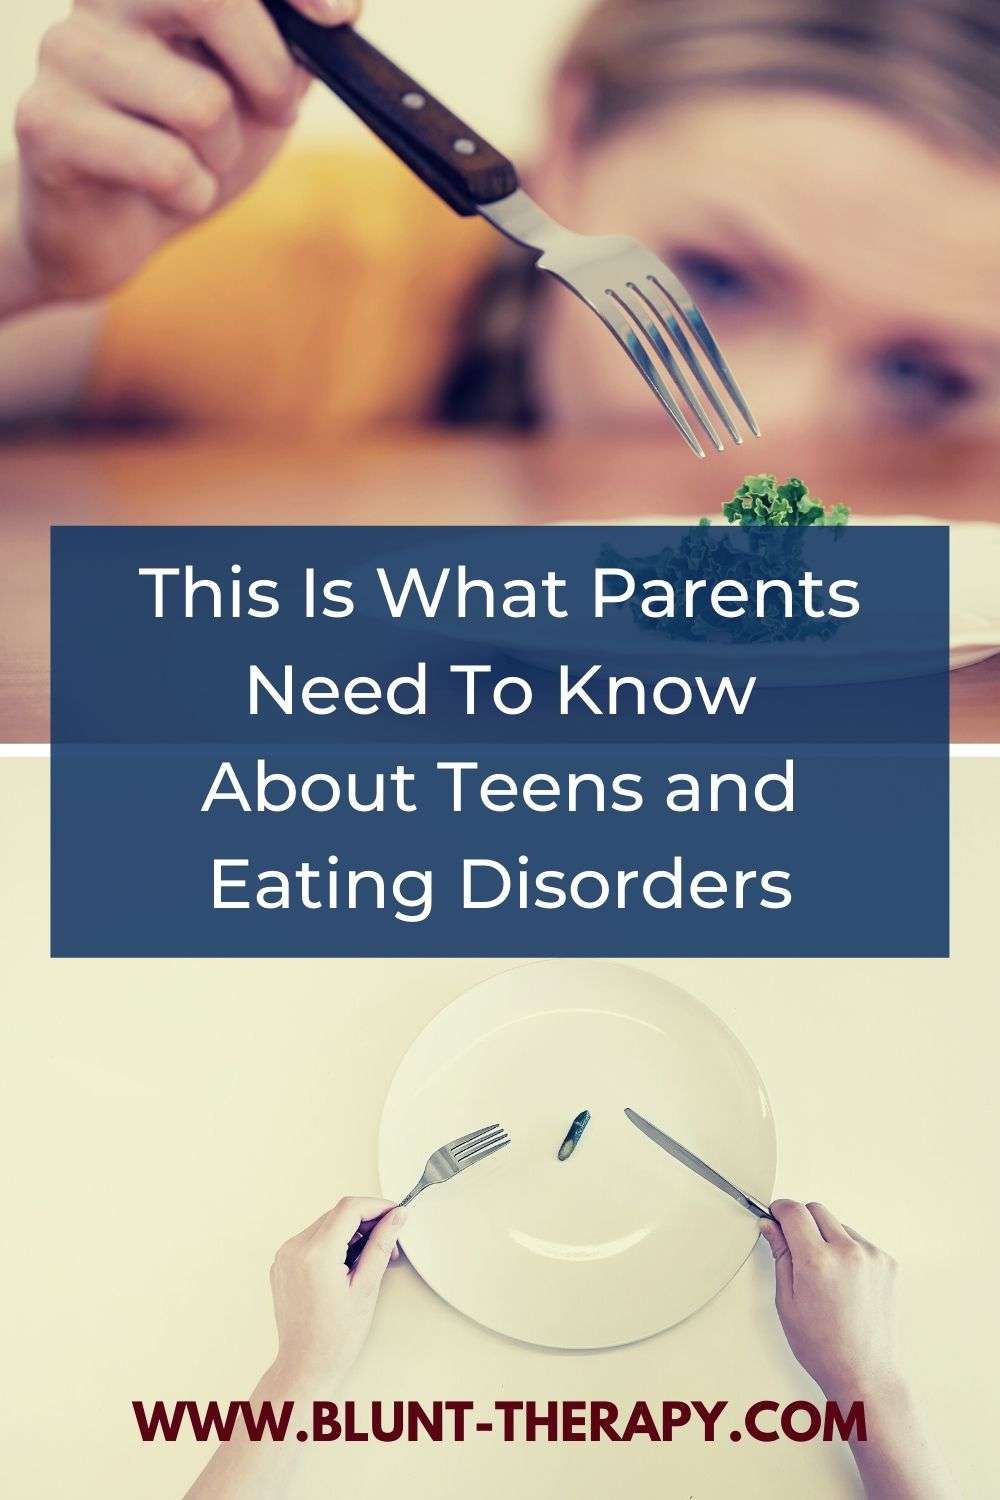 This Is What Parents Need To Know About Teens and Eating Disorders